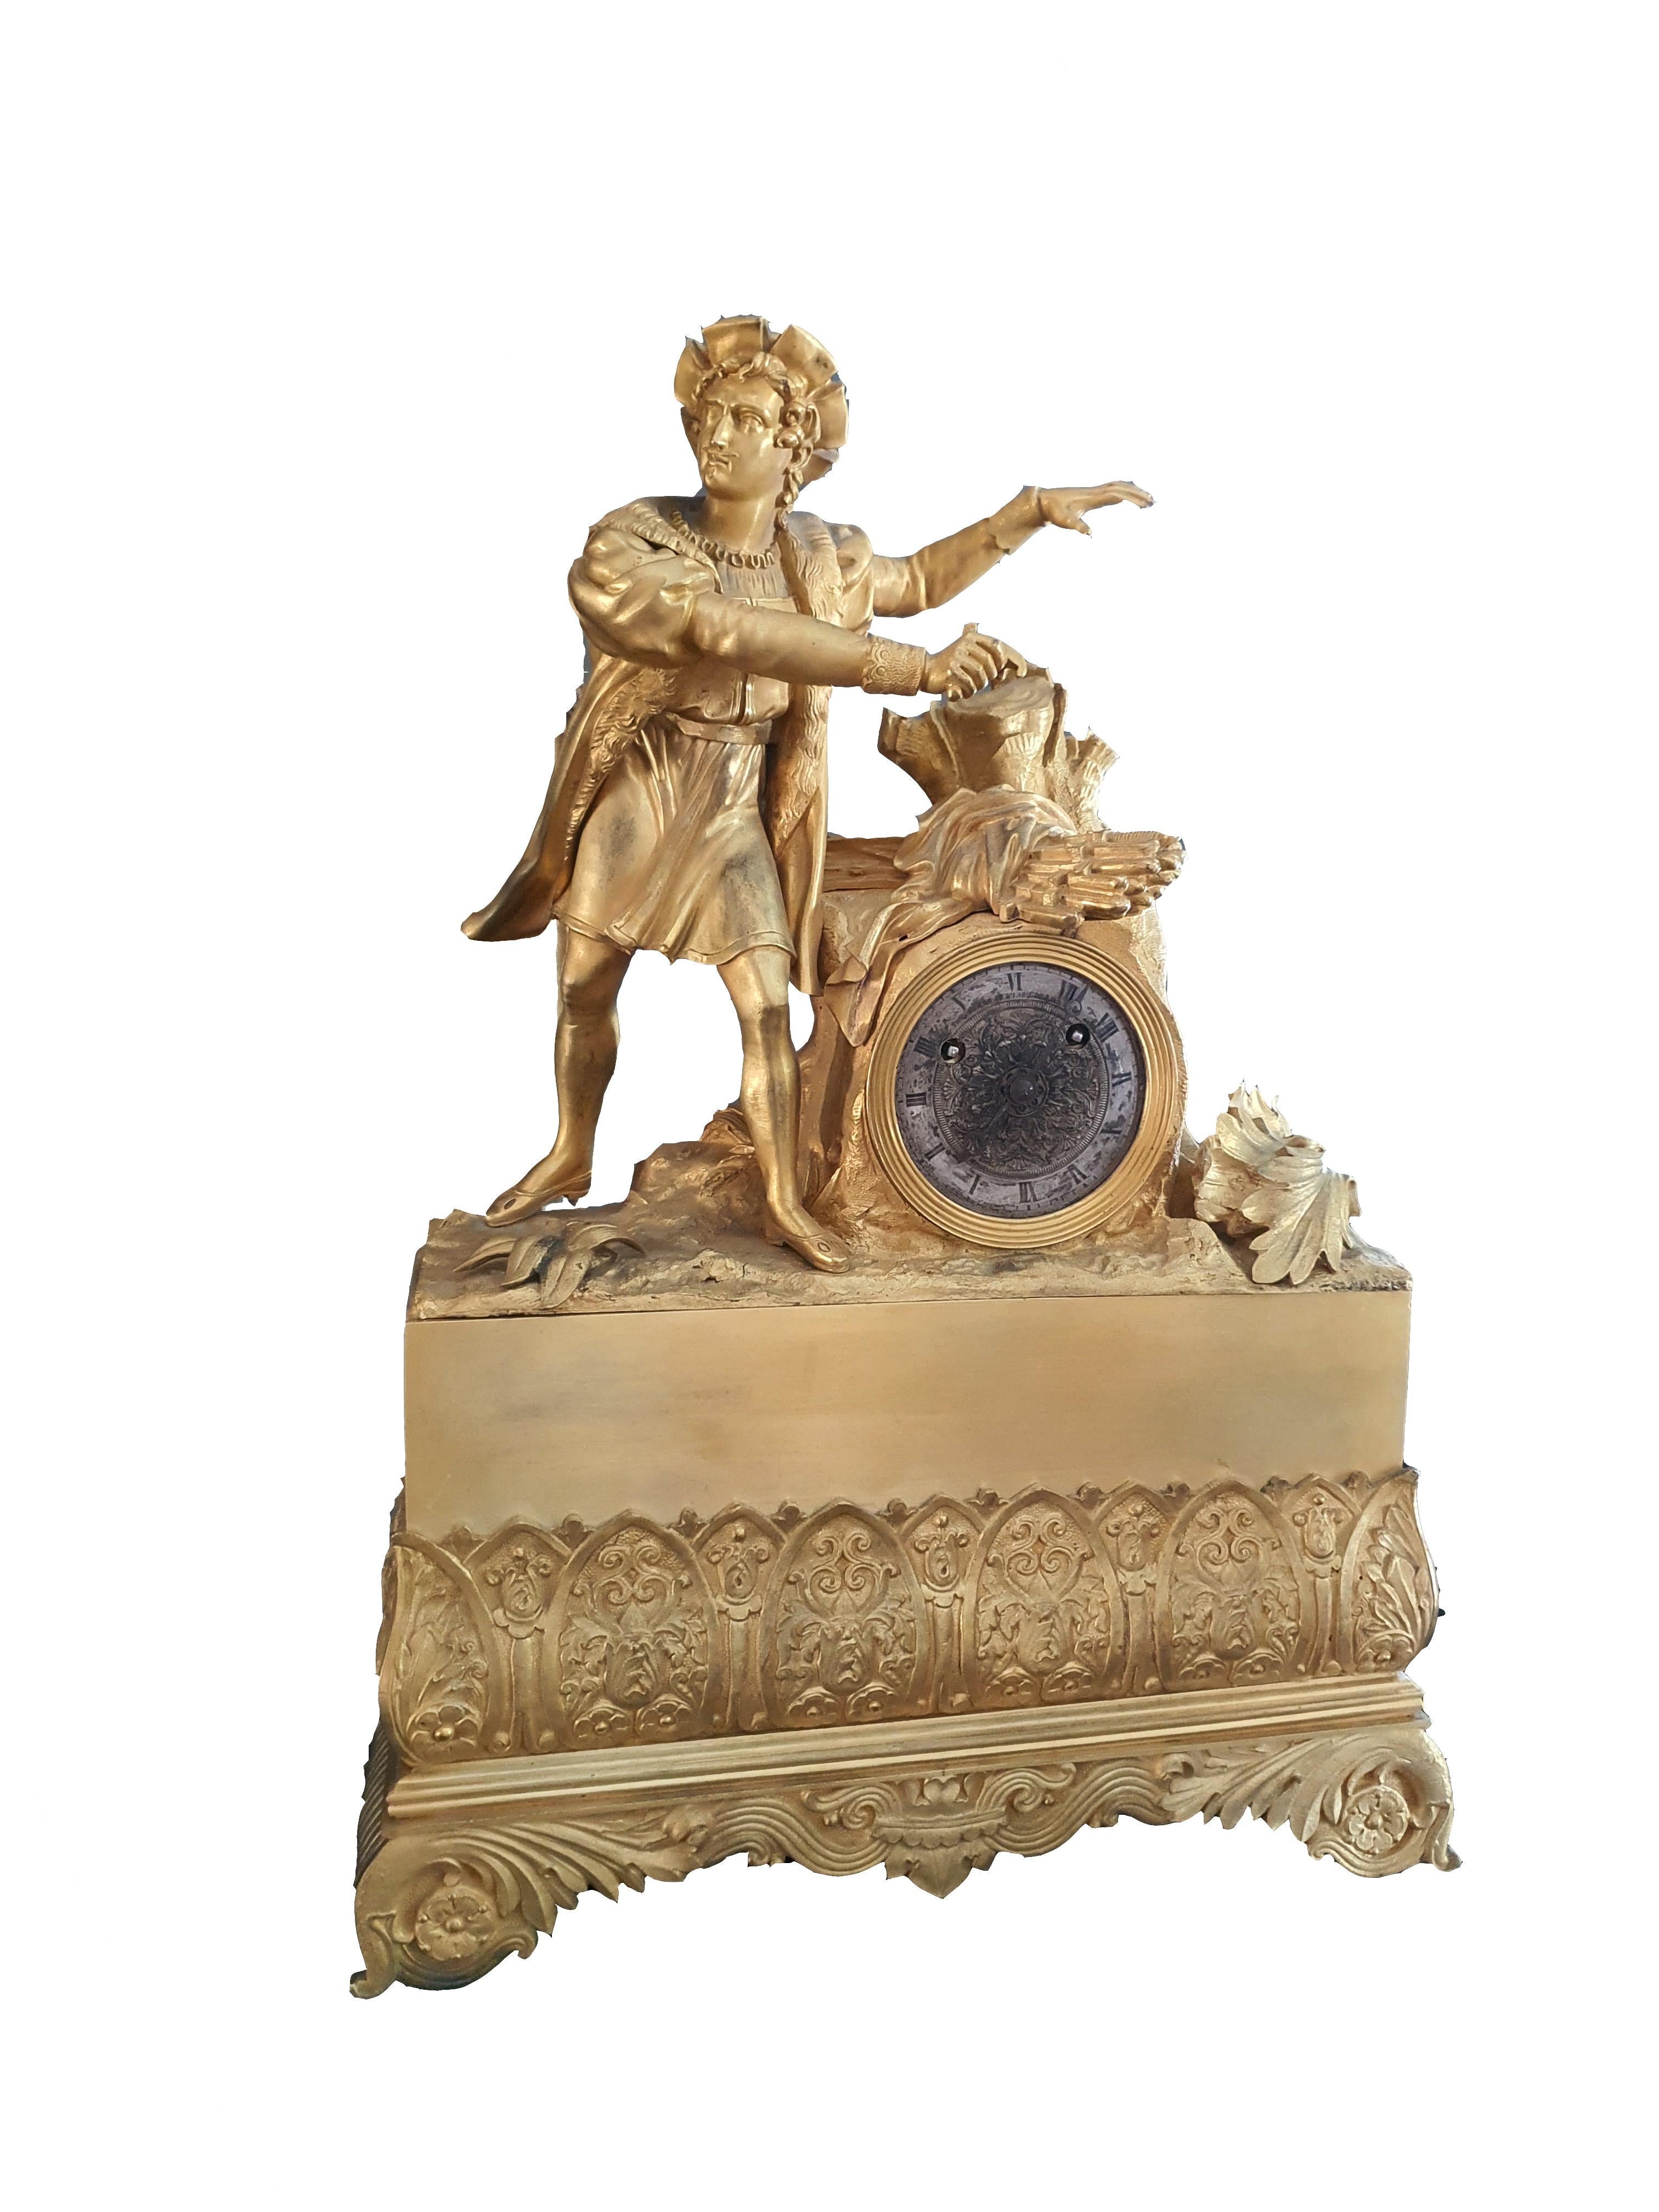 Elegant table clock in finely chiseled and gilded bronze. Parisian figure at the top of the clock.